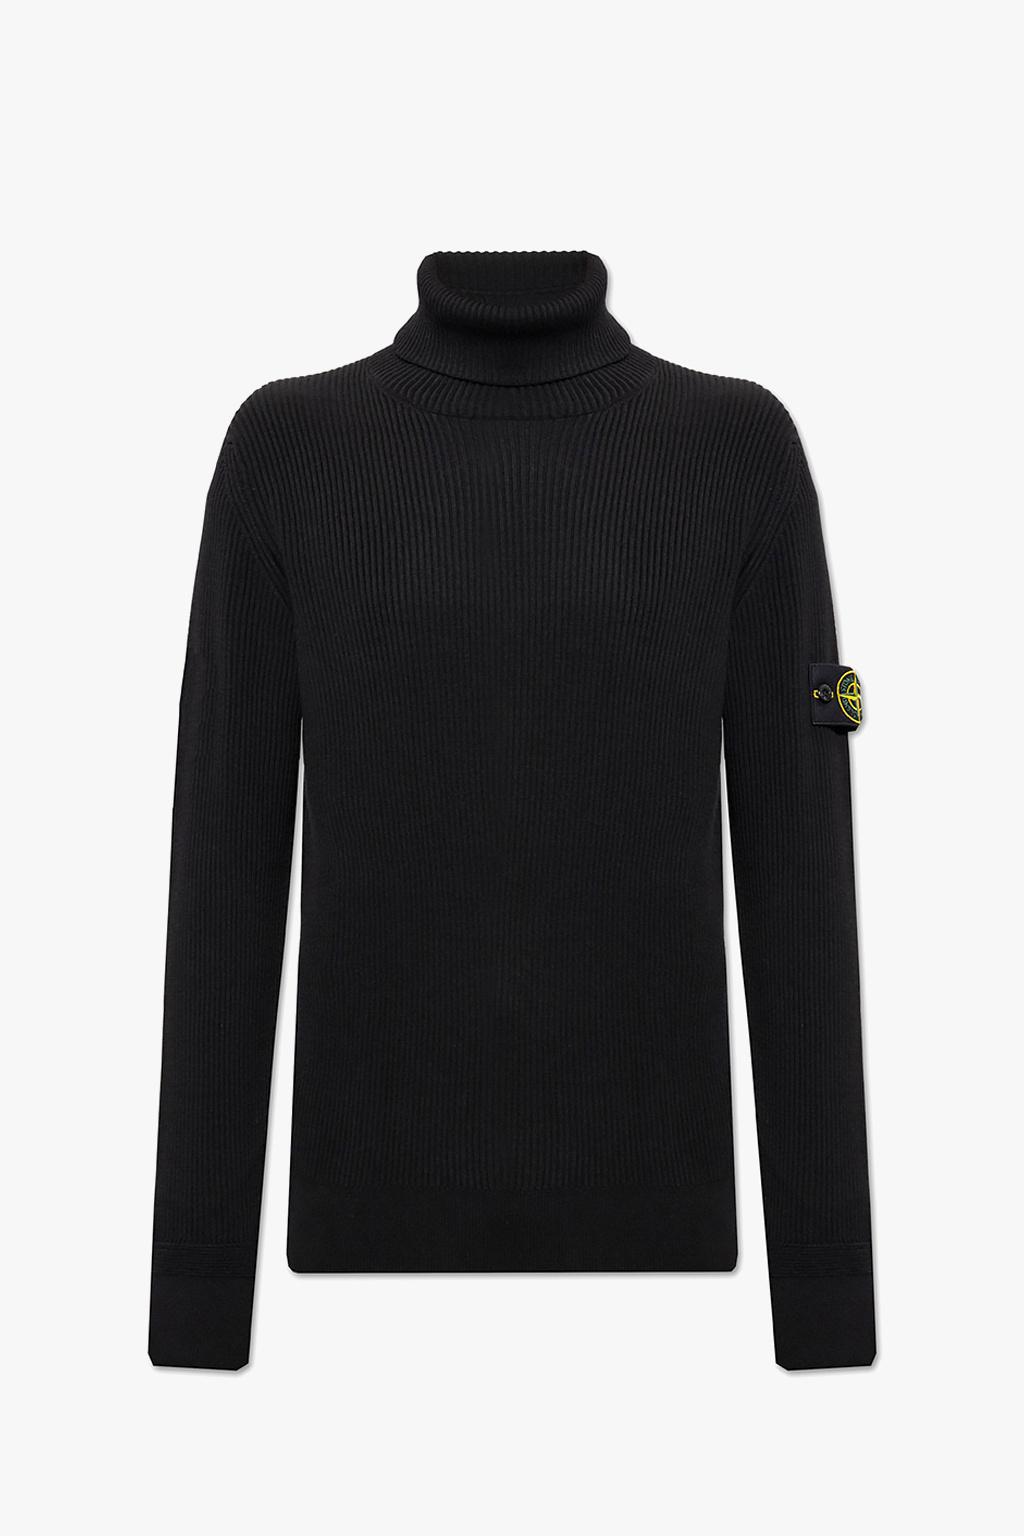 Stone Island Ribbed Turtleneck Sweater With Logo in Black for Men | Lyst